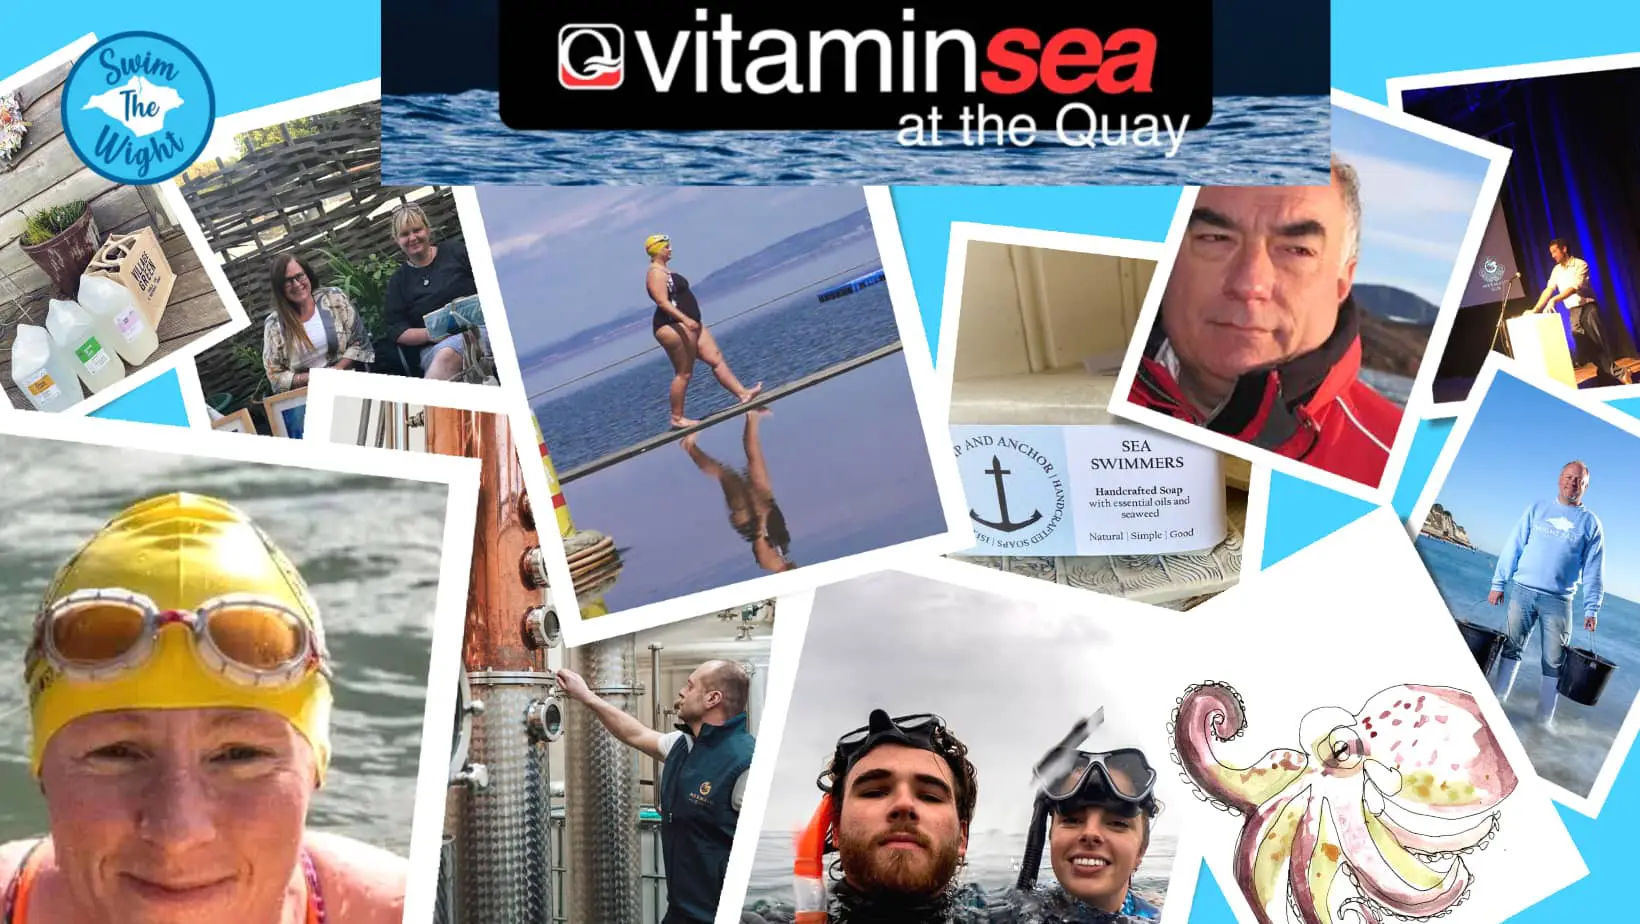 Vitamin Sea at the Quay poster with photos of sea swimmers